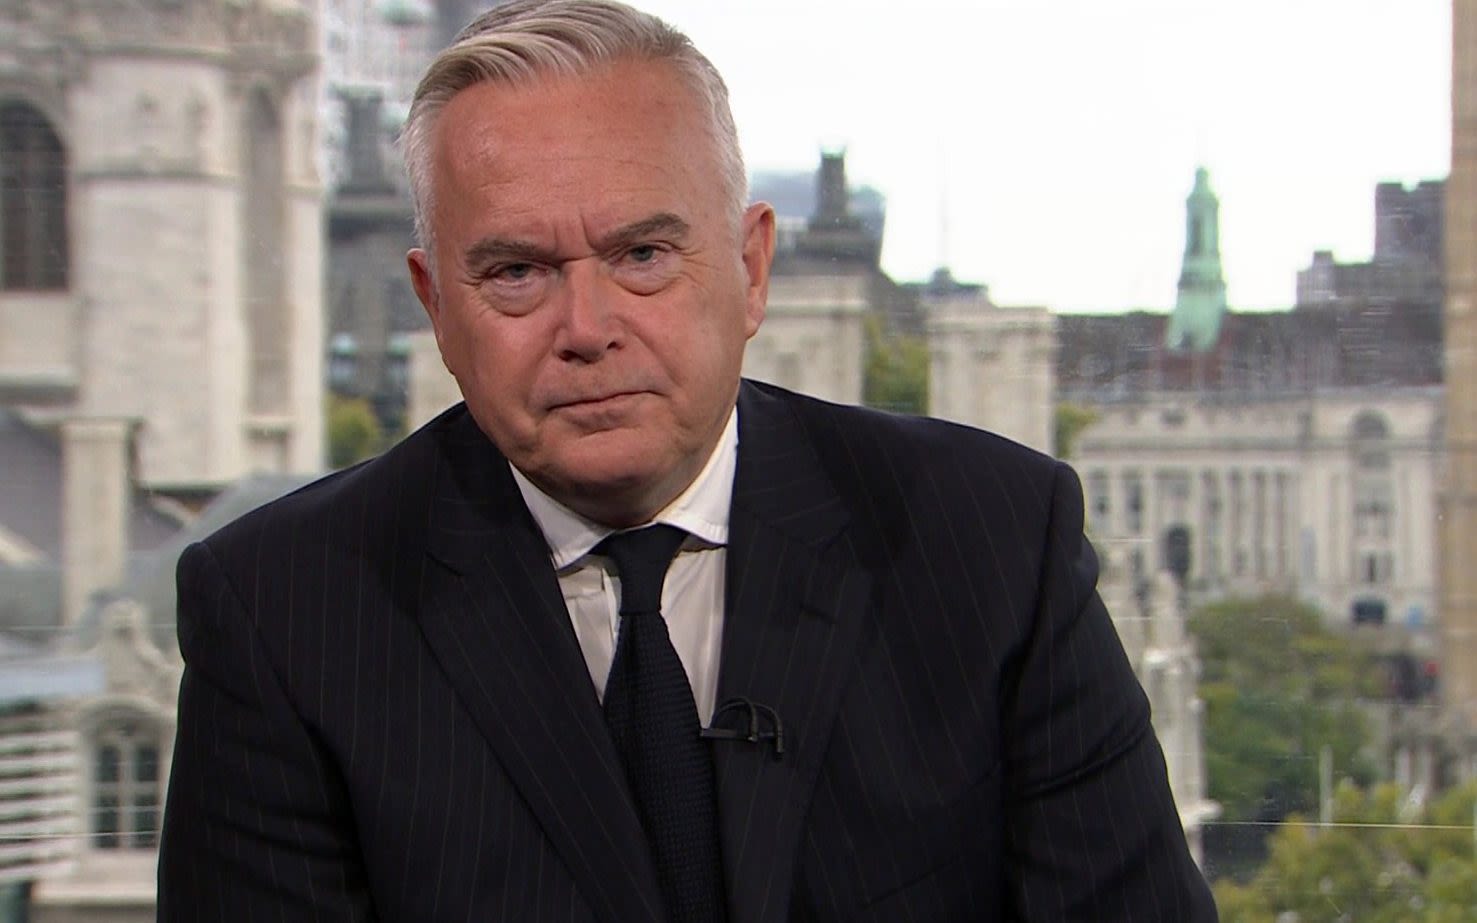 The BBC can erase Huw Edwards from iPlayer – but the stain on its reputation is permanent